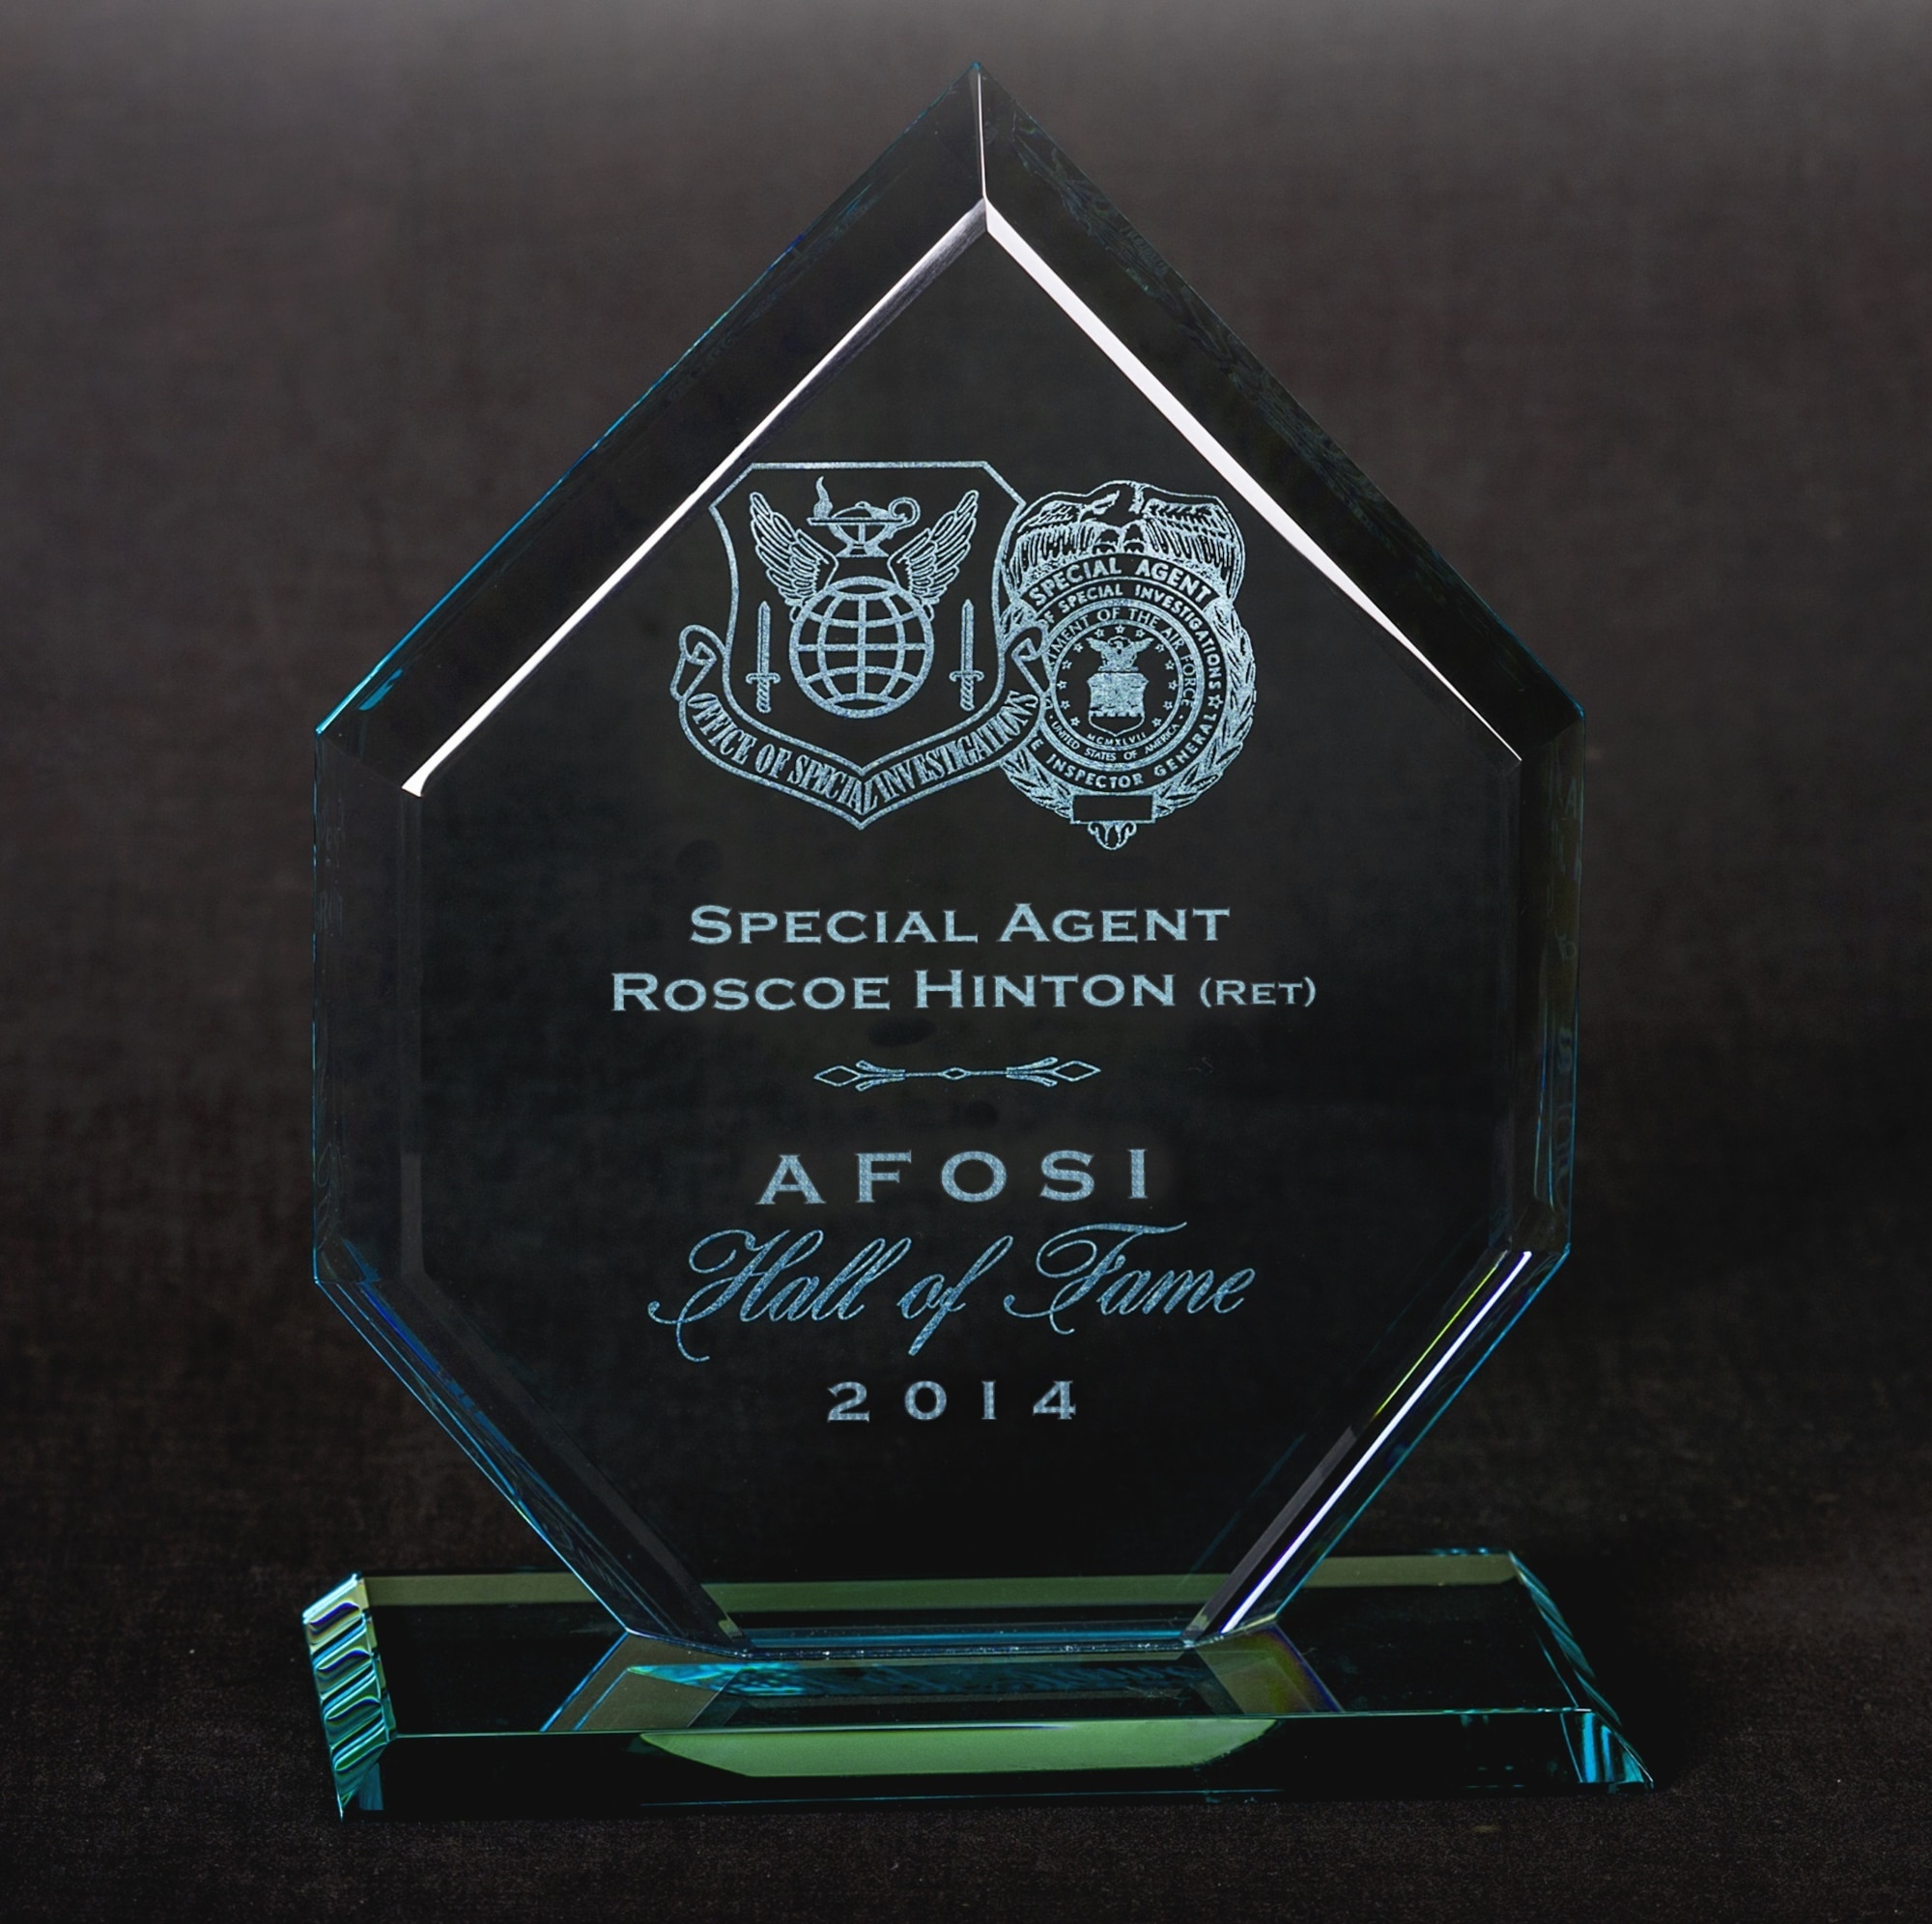 Each inductee into the Air Force Office of Special Investigations Hall of Fame receives an award like this one belonging to 2014 Hall of Fame Inductee Special Agent (Retired) Roscoe Hinton. (AFOSI photo by Michael Hastings)